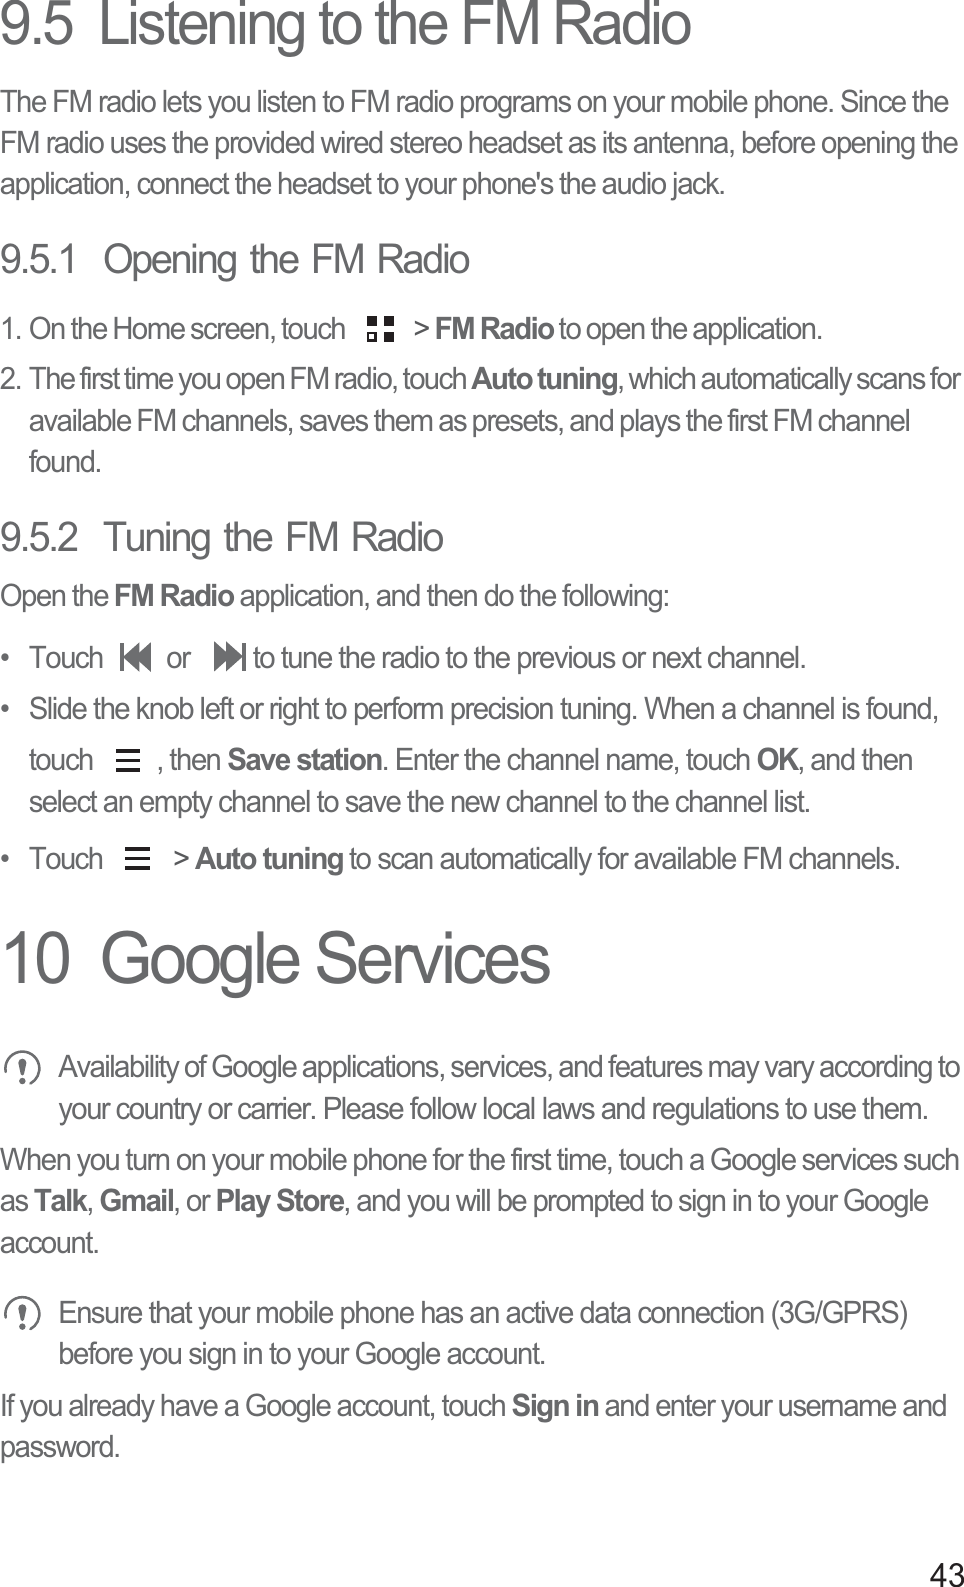 439.5  Listening to the FM RadioThe FM radio lets you listen to FM radio programs on your mobile phone. Since the FM radio uses the provided wired stereo headset as its antenna, before opening the application, connect the headset to your phone&apos;s the audio jack.9.5.1  Opening the FM Radio1. On the Home screen, touch   &gt; FM Radio to open the application.2. The first time you open FM radio, touch Auto tuning, which automatically scans for available FM channels, saves them as presets, and plays the first FM channel found.9.5.2  Tuning the FM RadioOpen the FM Radio application, and then do the following:•  Touch  or  to tune the radio to the previous or next channel.•  Slide the knob left or right to perform precision tuning. When a channel is found, touch , then Save station. Enter the channel name, touch OK, and then select an empty channel to save the new channel to the channel list.• Touch   &gt; Auto tuning to scan automatically for available FM channels.10  Google Services Availability of Google applications, services, and features may vary according to your country or carrier. Please follow local laws and regulations to use them.When you turn on your mobile phone for the first time, touch a Google services such as Talk, Gmail, or Play Store, and you will be prompted to sign in to your Google account. Ensure that your mobile phone has an active data connection (3G/GPRS) before you sign in to your Google account.If you already have a Google account, touch Sign in and enter your username and password.